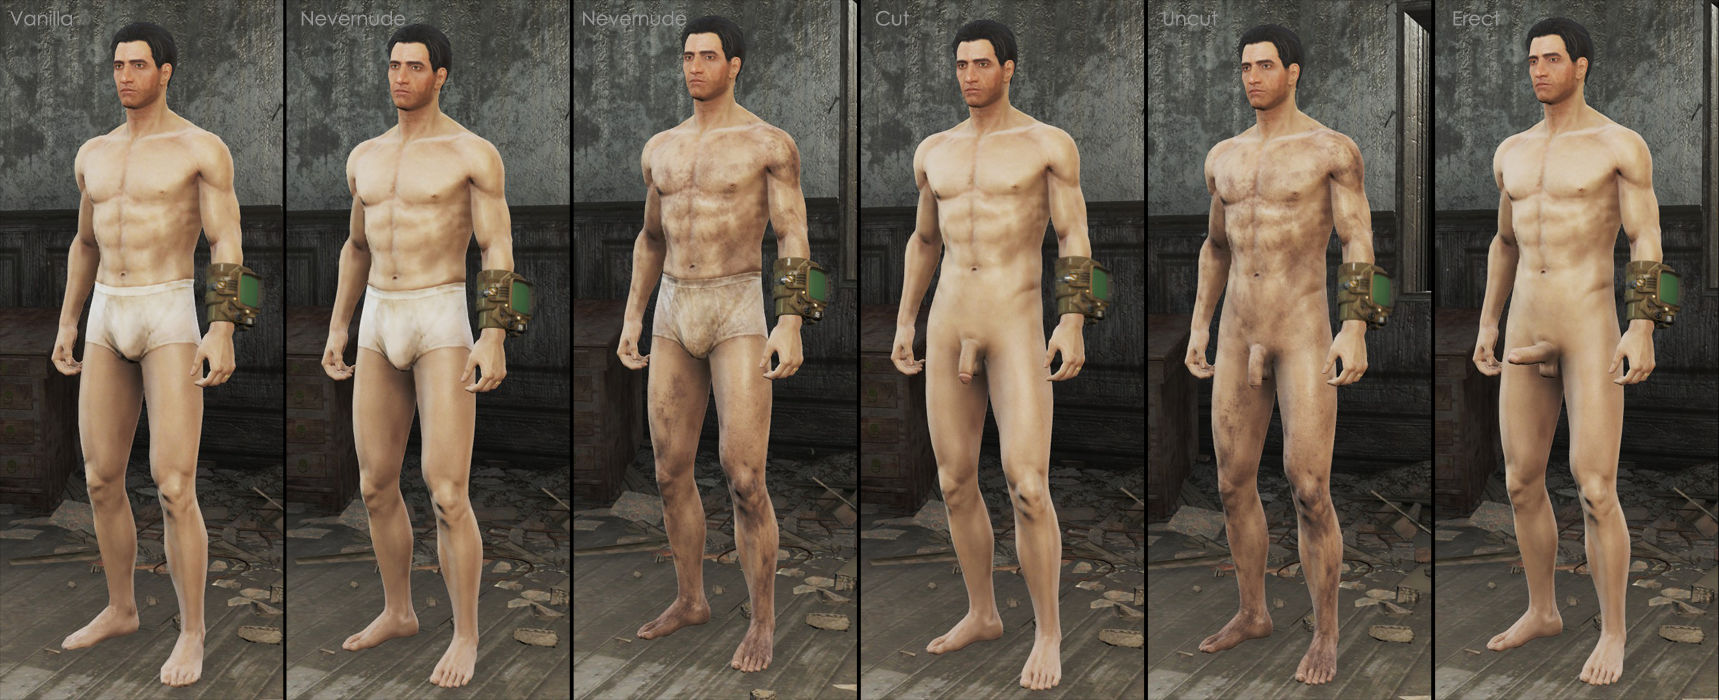 fallout 4 new vegas nude male mod.png. 